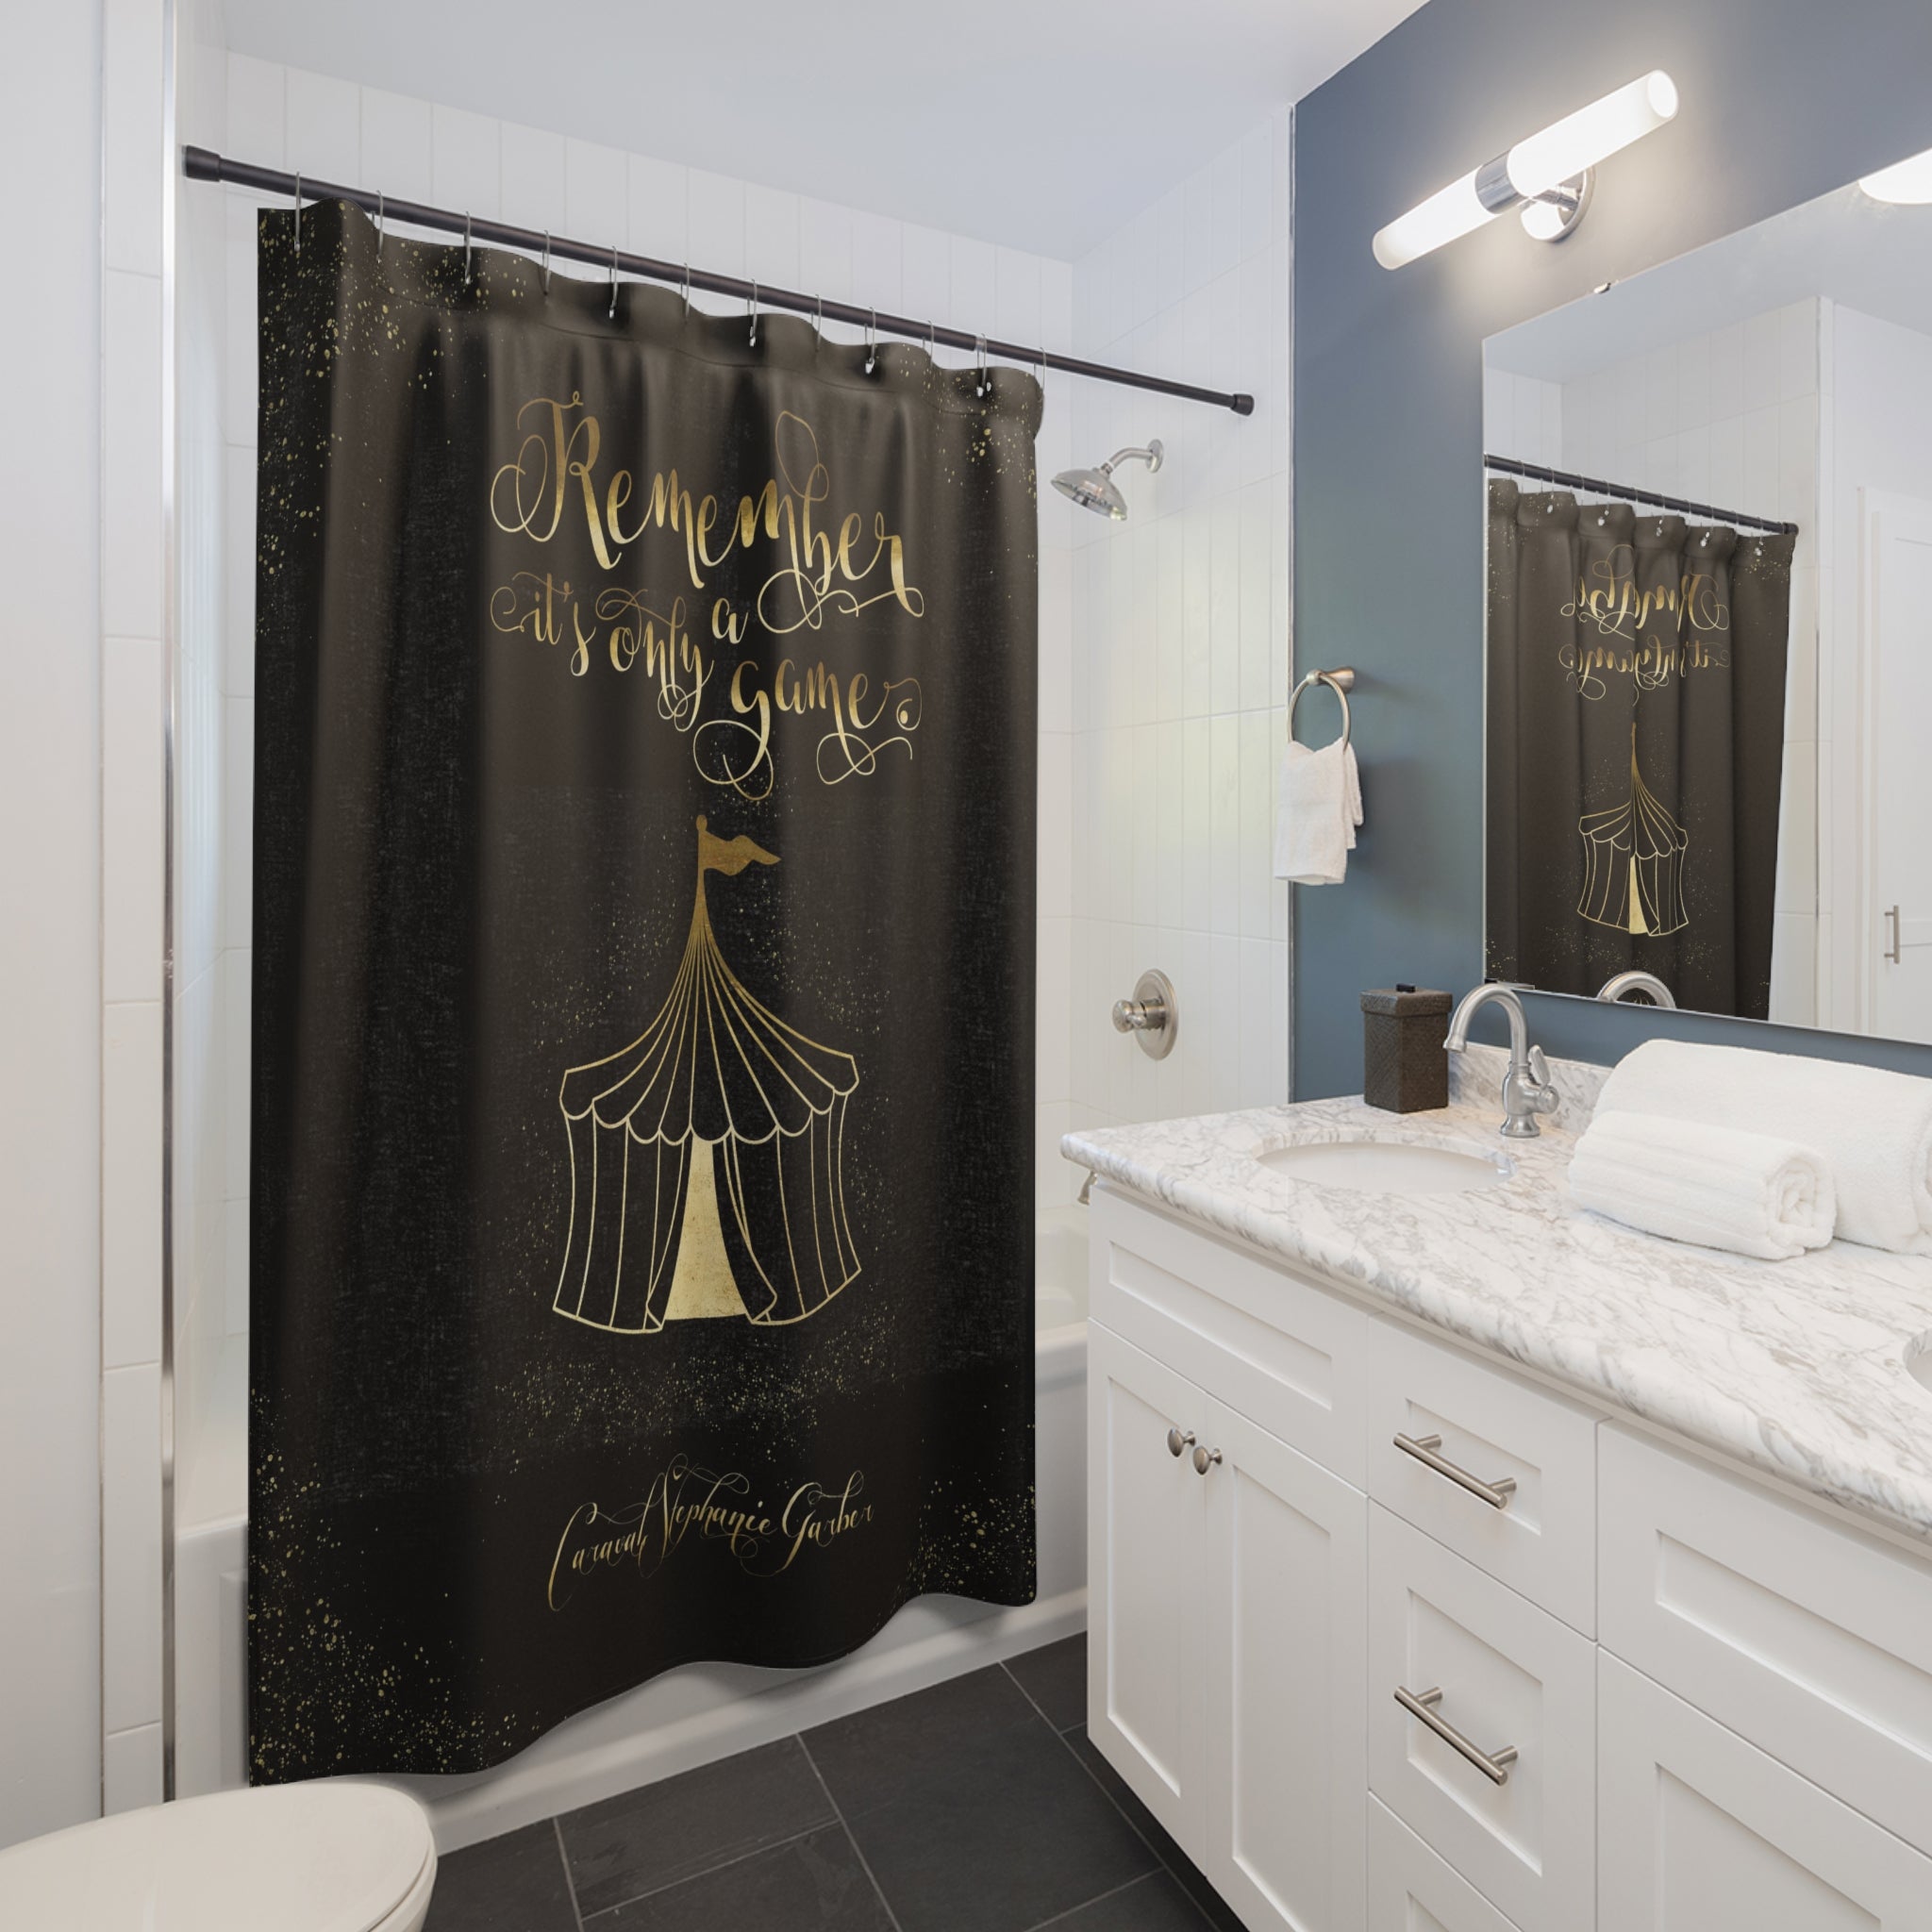 Remember... Caraval Shower Curtain